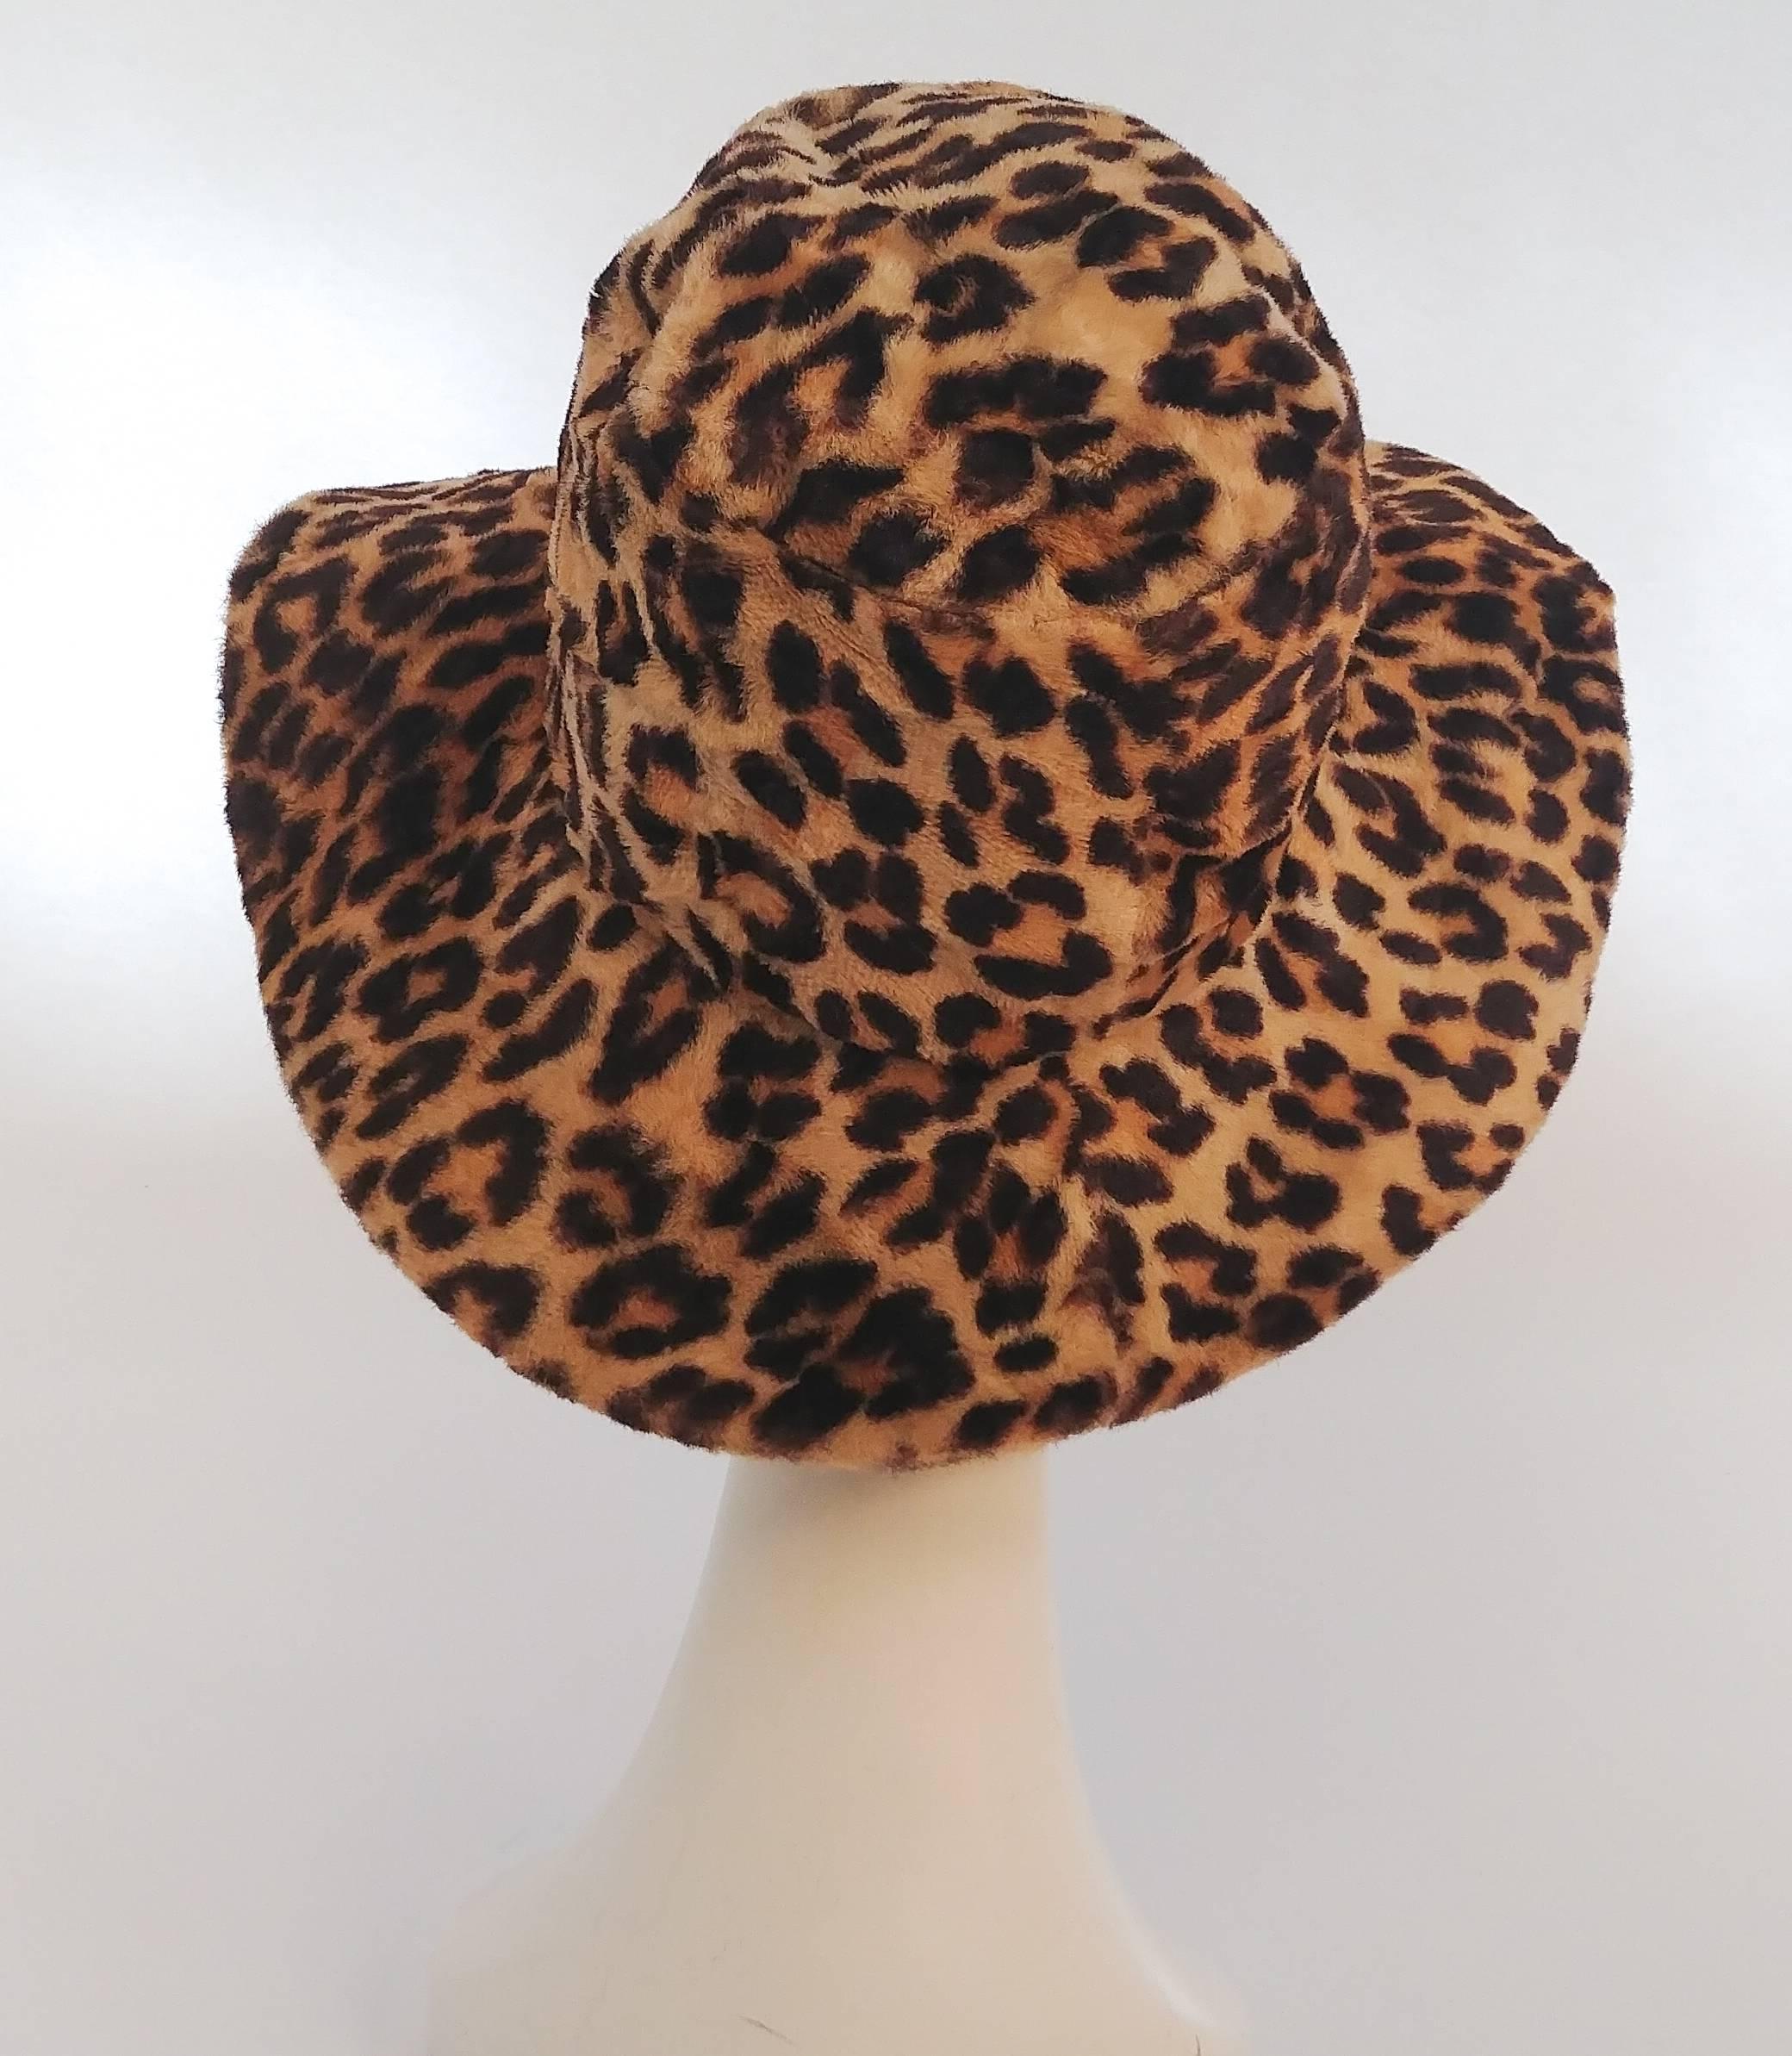 1960s Lilly Dache Leopard Print Wide Brim Hat. Faux fur floppy brim hat by acclaimed milliner of the 1930s-1960s, Lilly Dache. 